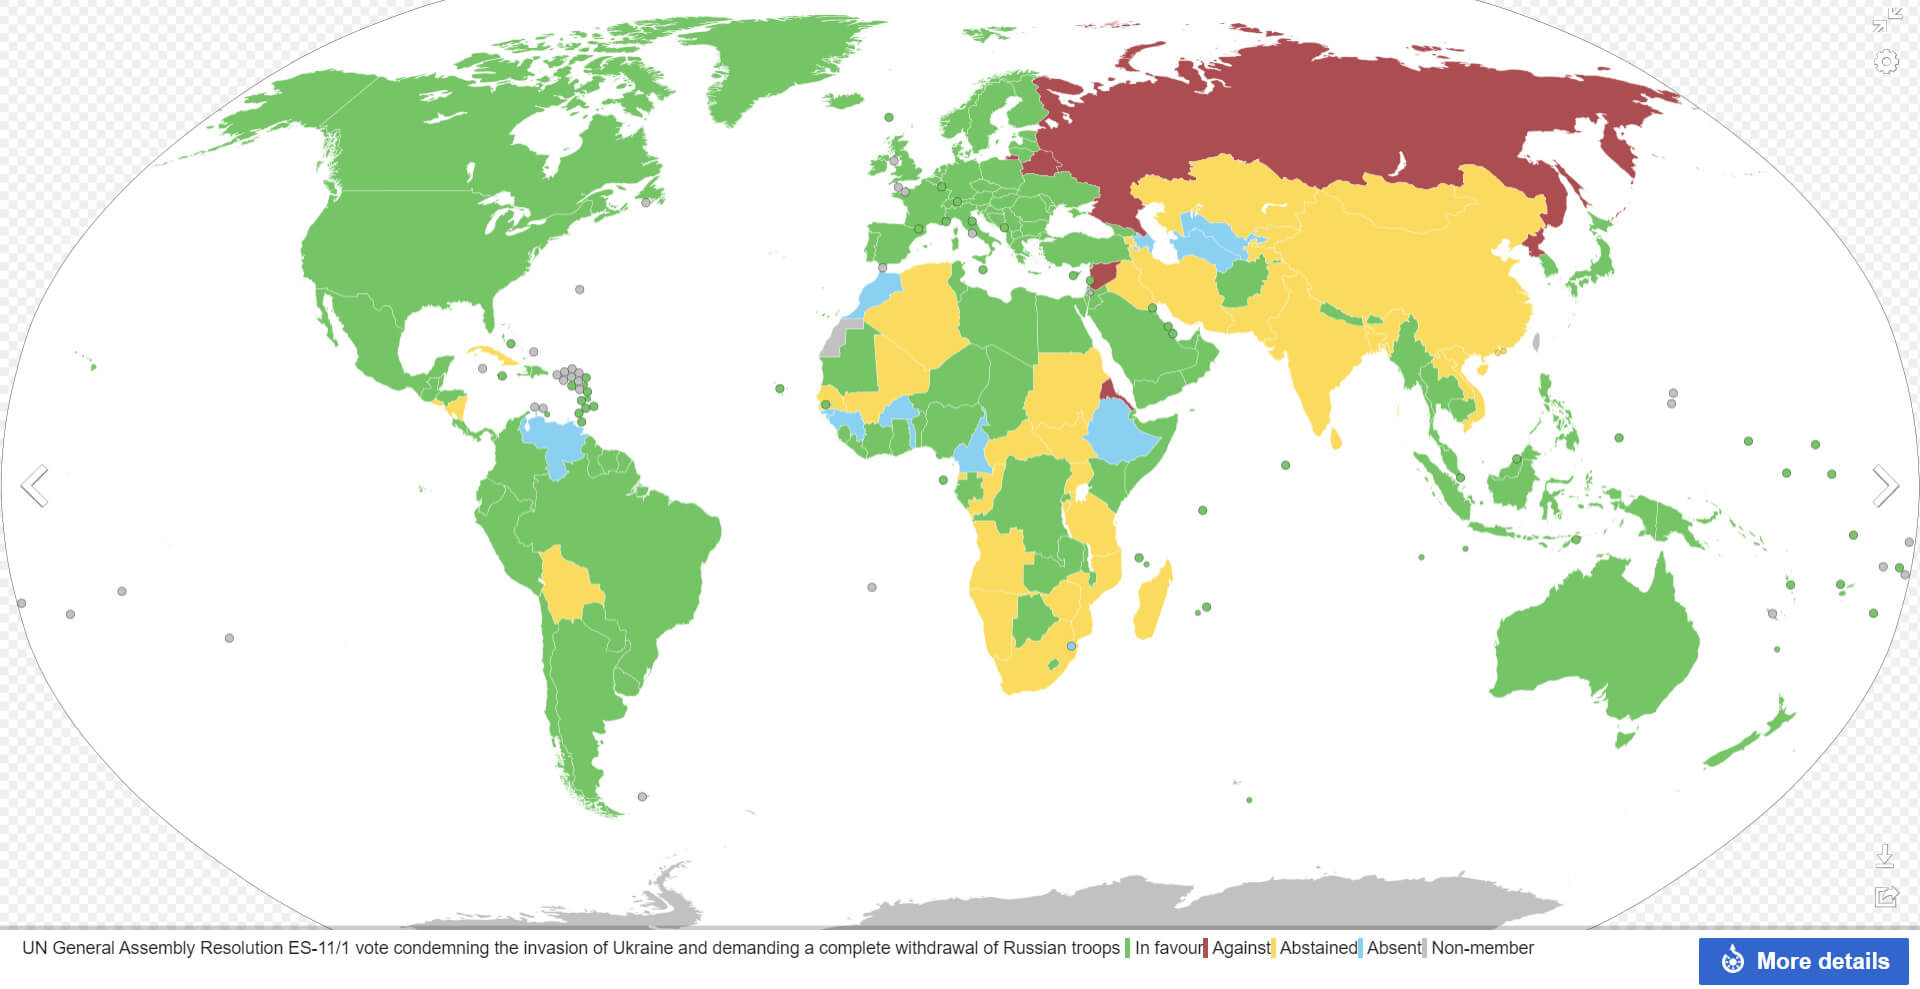 UN General Assembly Resolution Vote